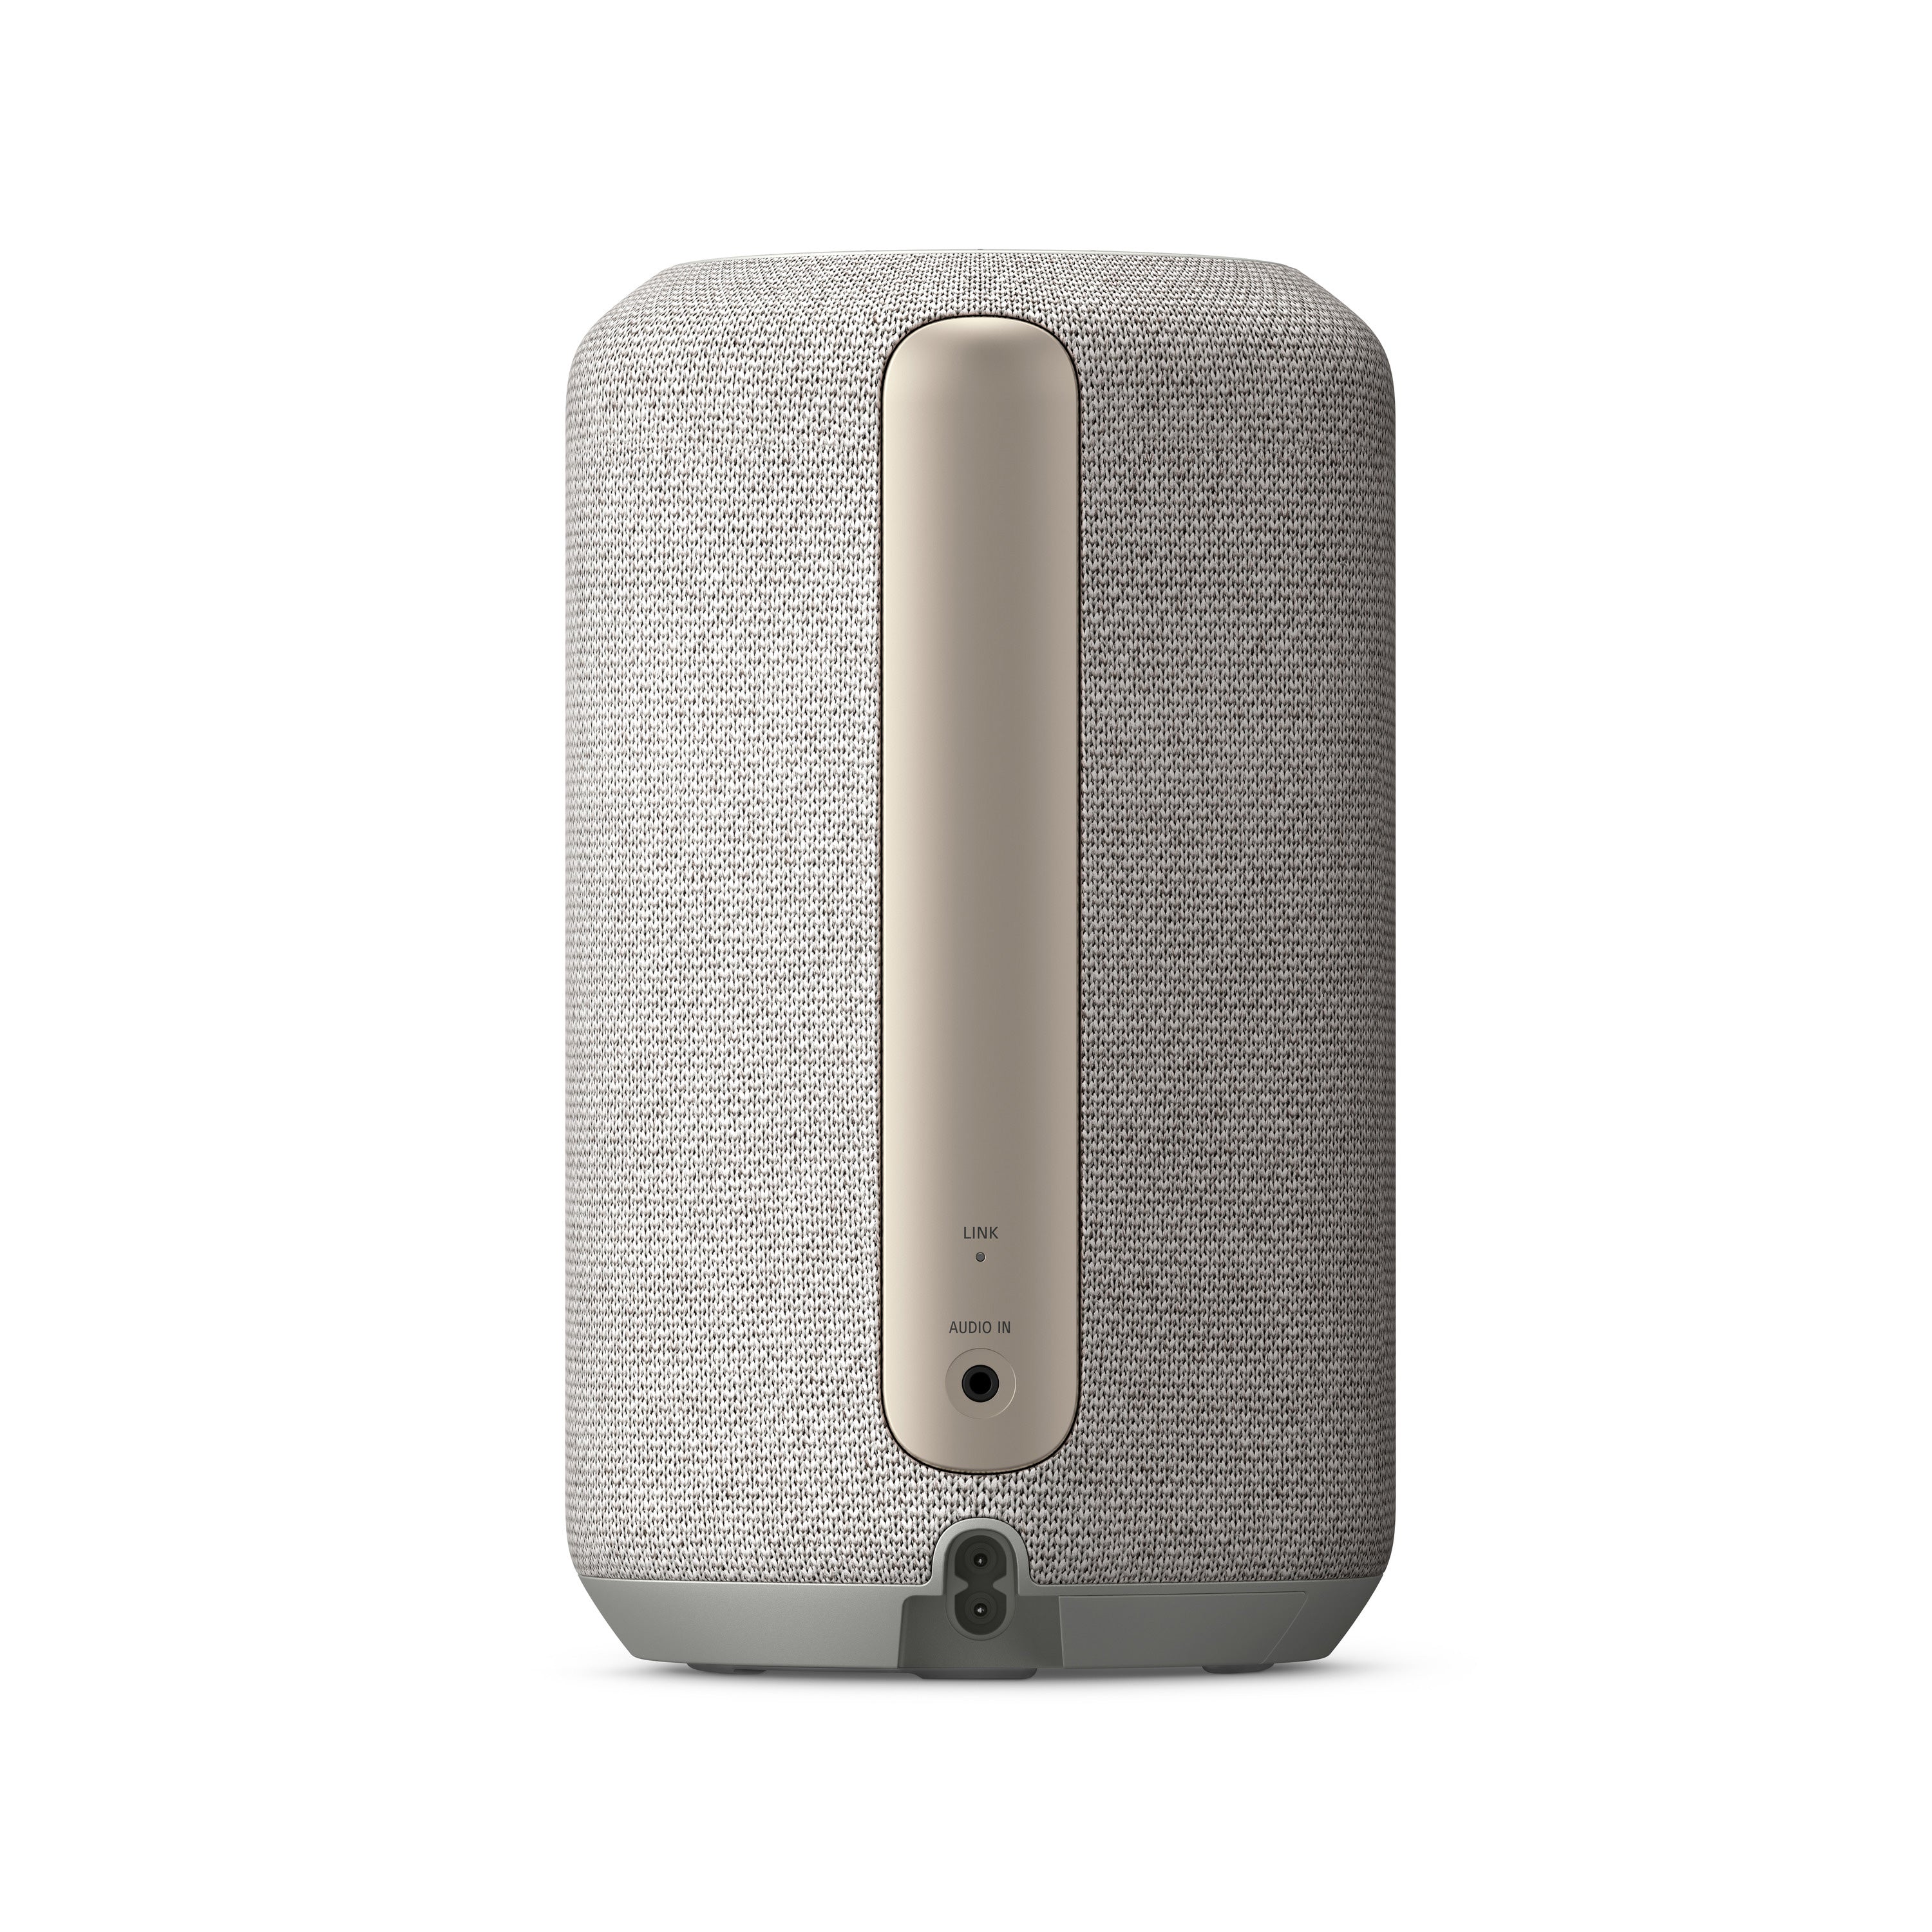 SRS-RA3000 Premium Wireless Speaker with Ambient Room-filling Sound (Light Grey)